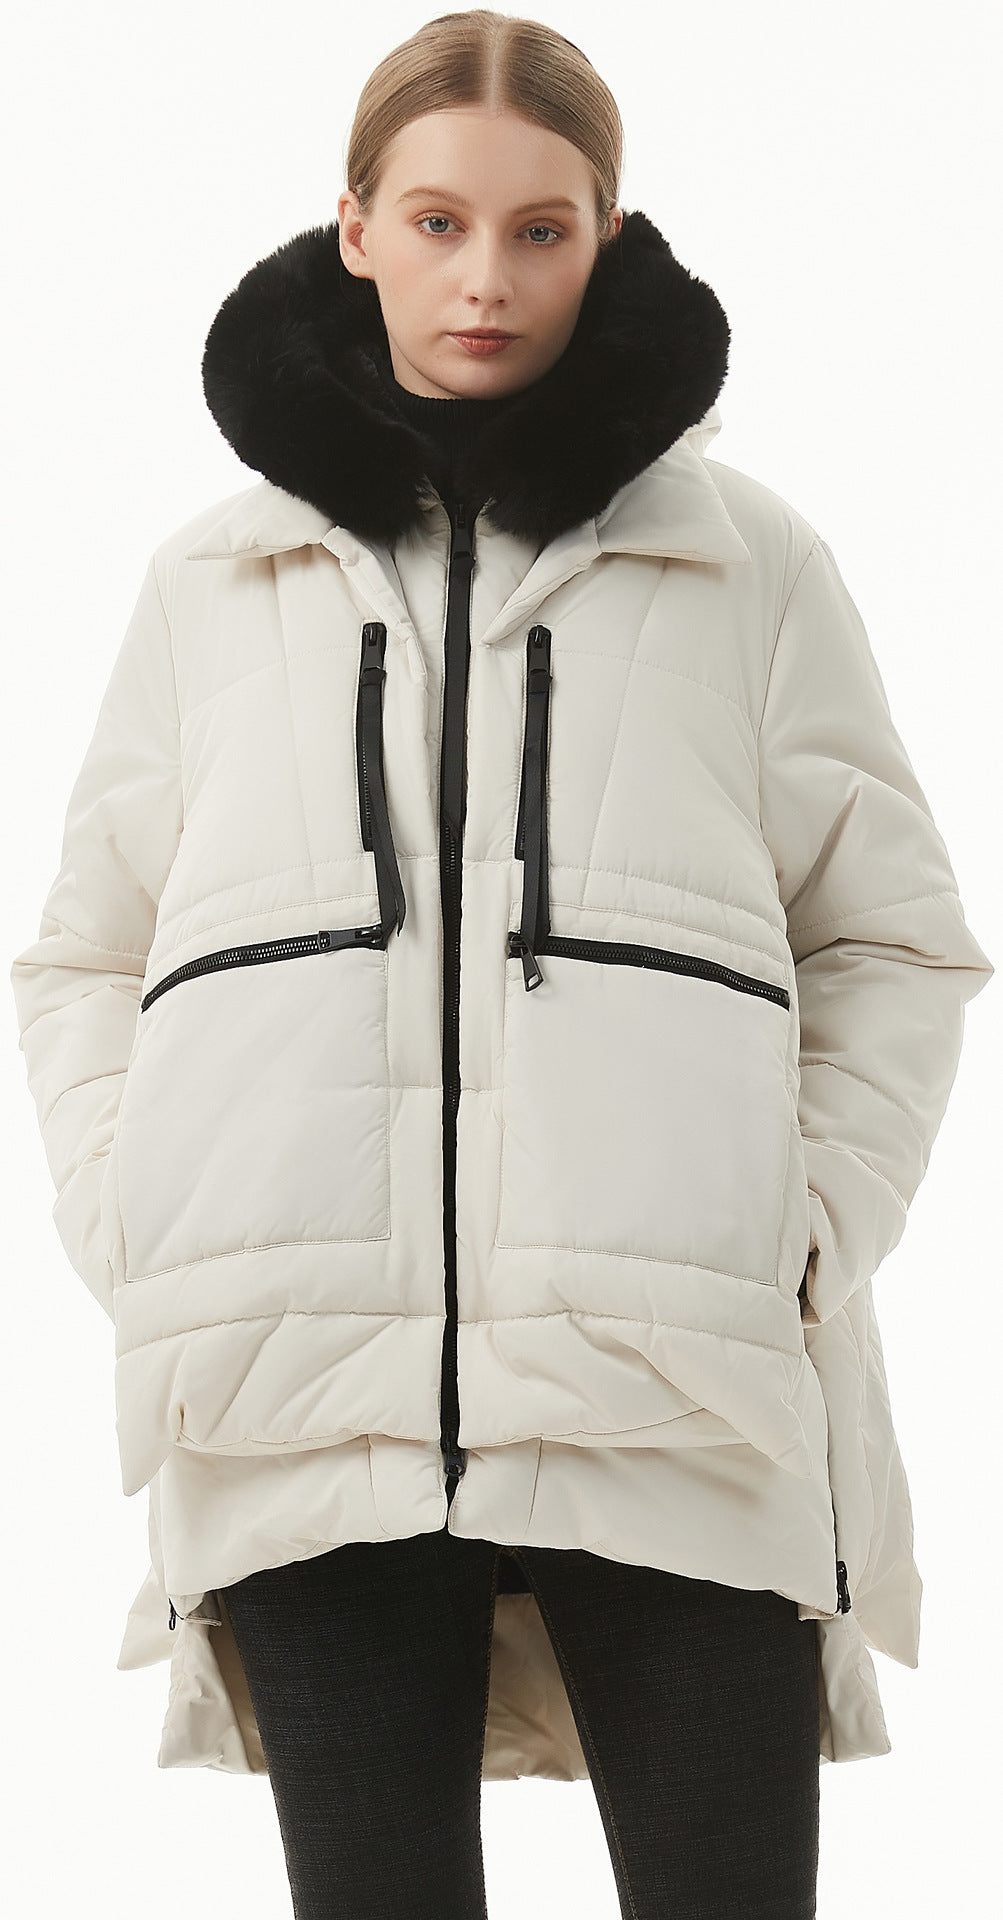 jackets  | Women's Casual Hooded Middle Long Cotton-padded Coat | Beige |  L| thecurvestory.myshopify.com